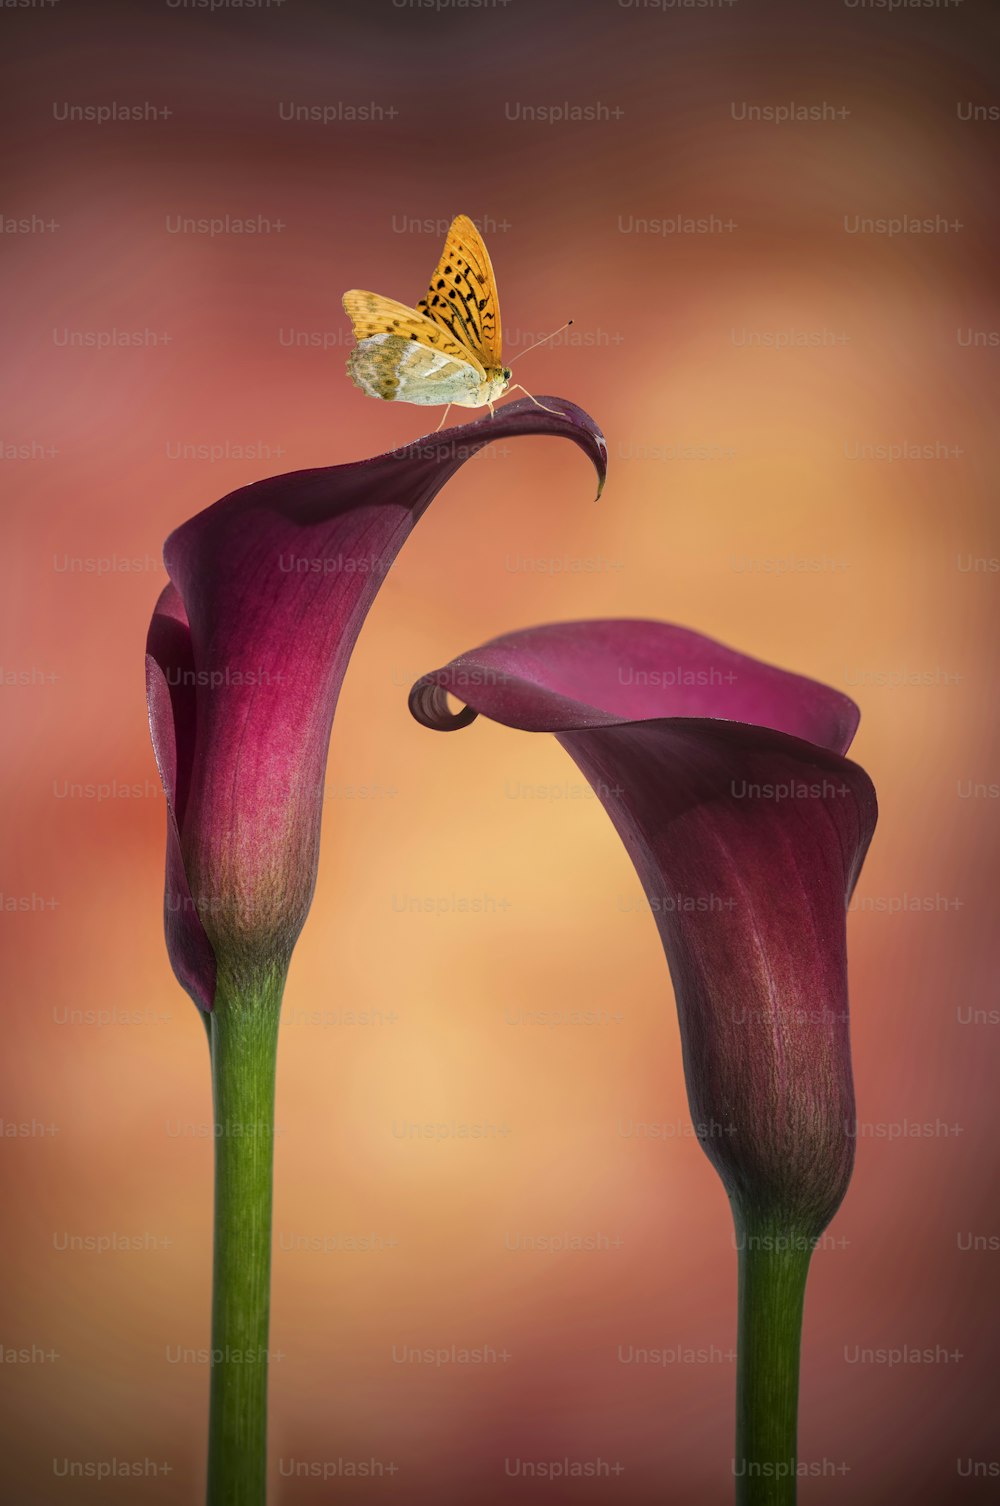 Butterfly on Stunning macro close up image of colorful vibrant calla lily flower